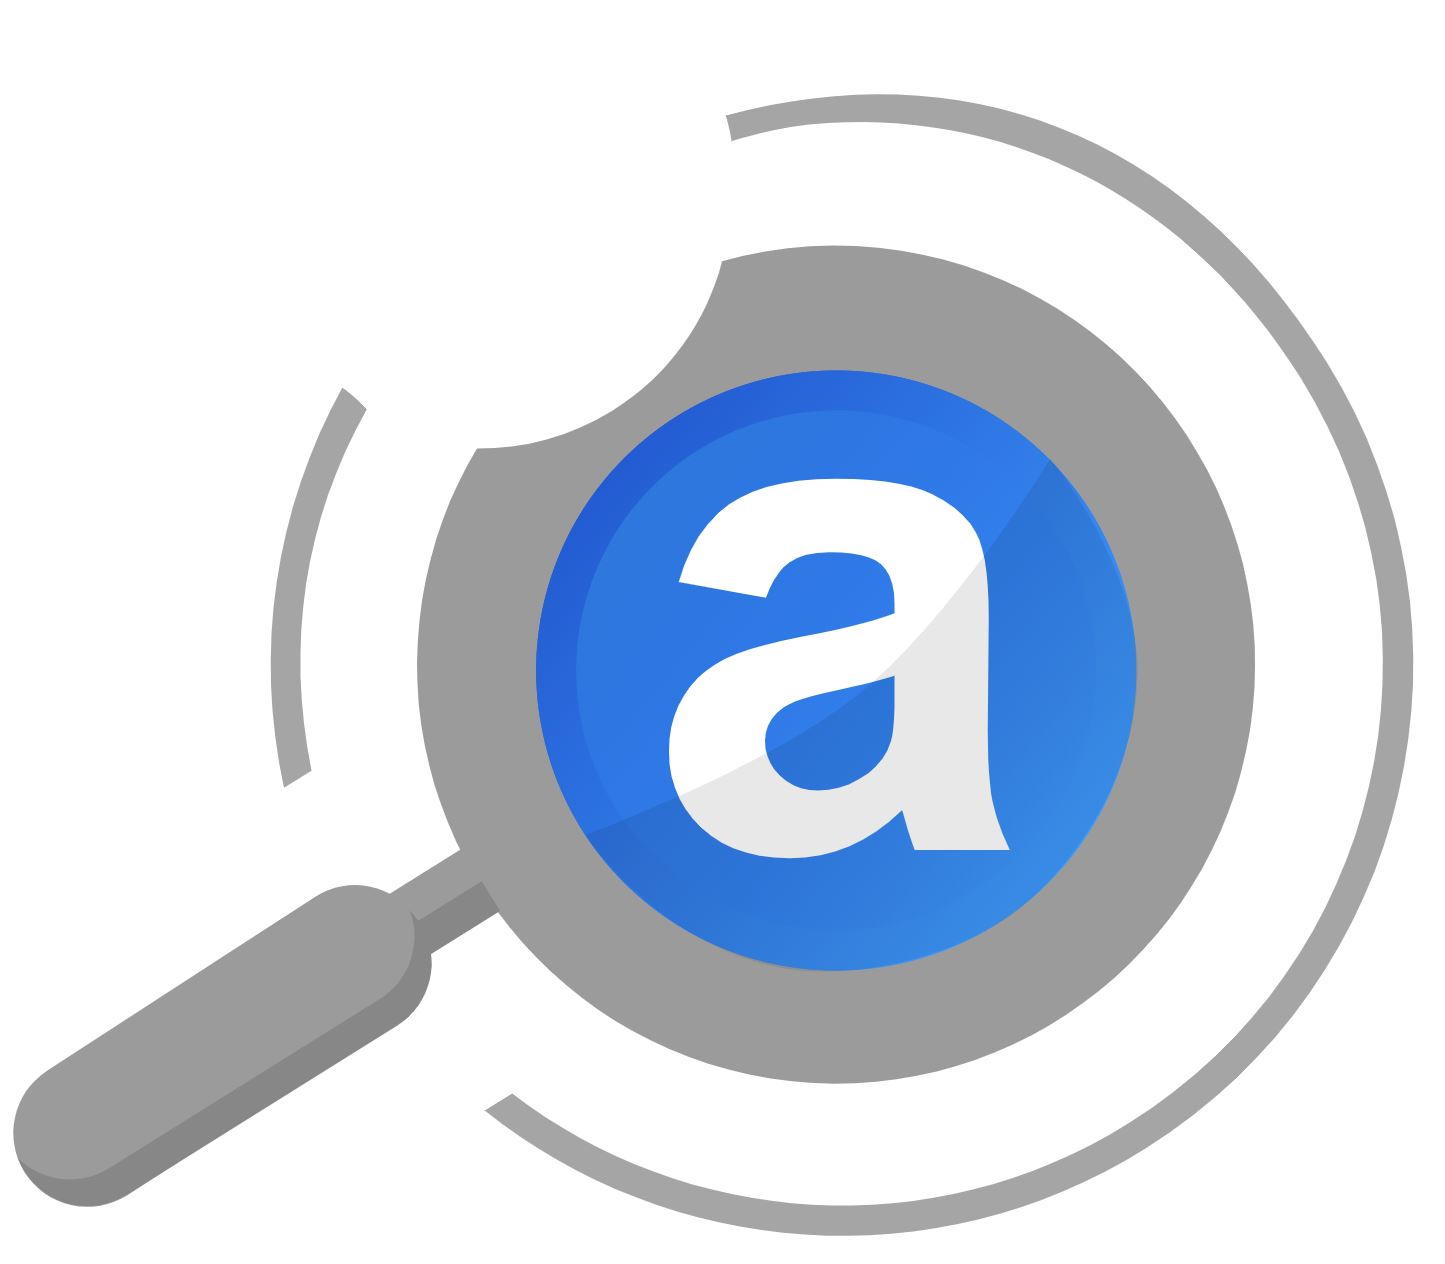 Graphic logo of lowercase letter a inside a stylized magnifying glass